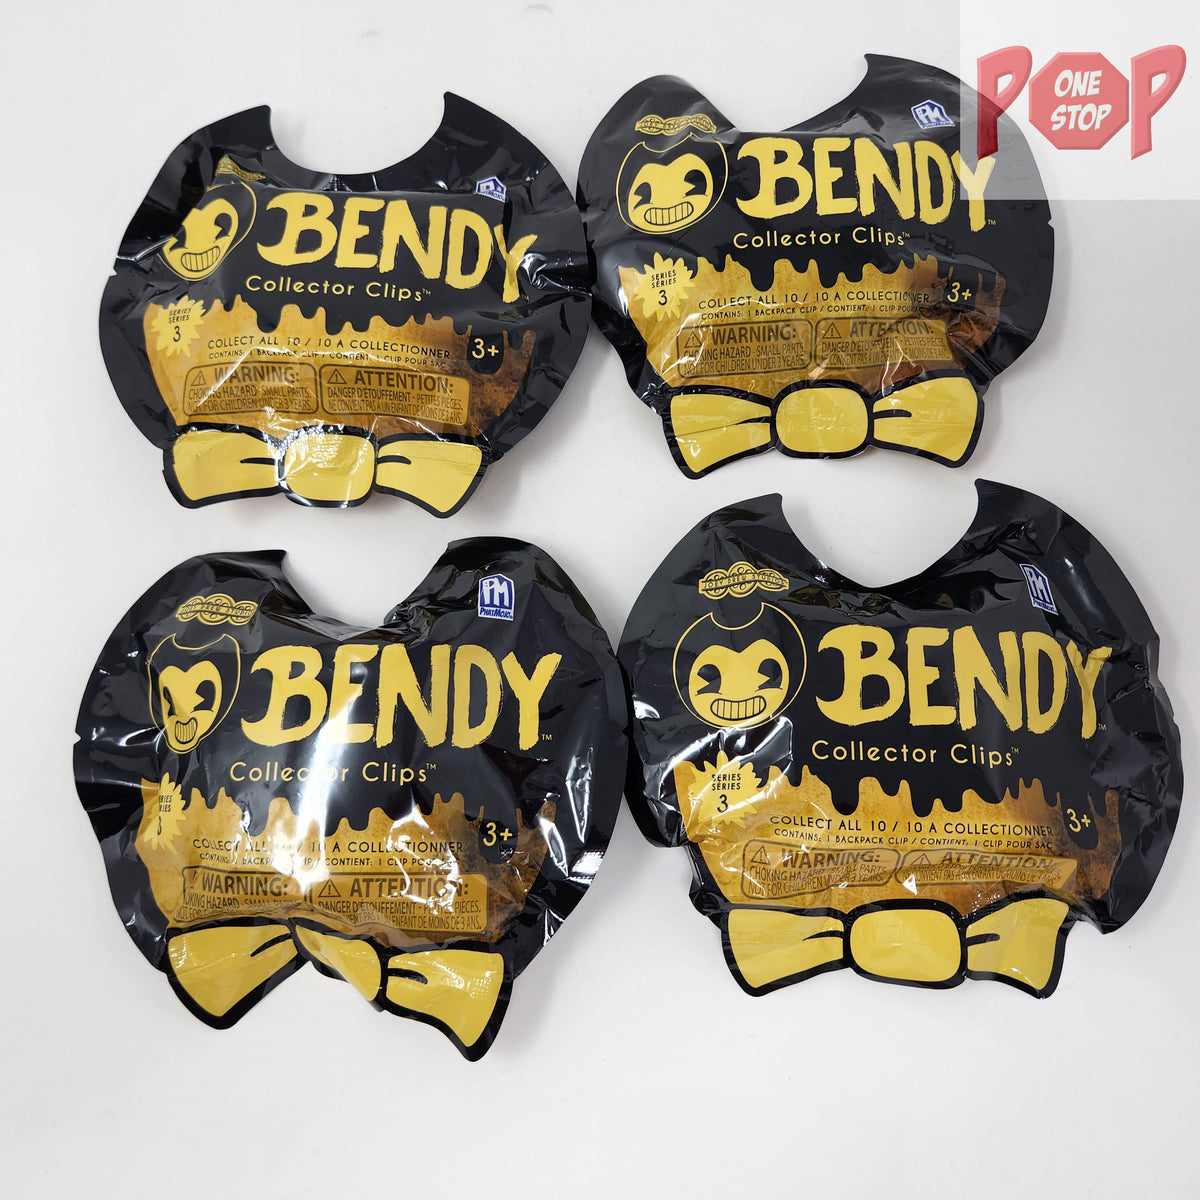 Bendy & the Ink Machine Series 2 Collector Clips Mystery Pack